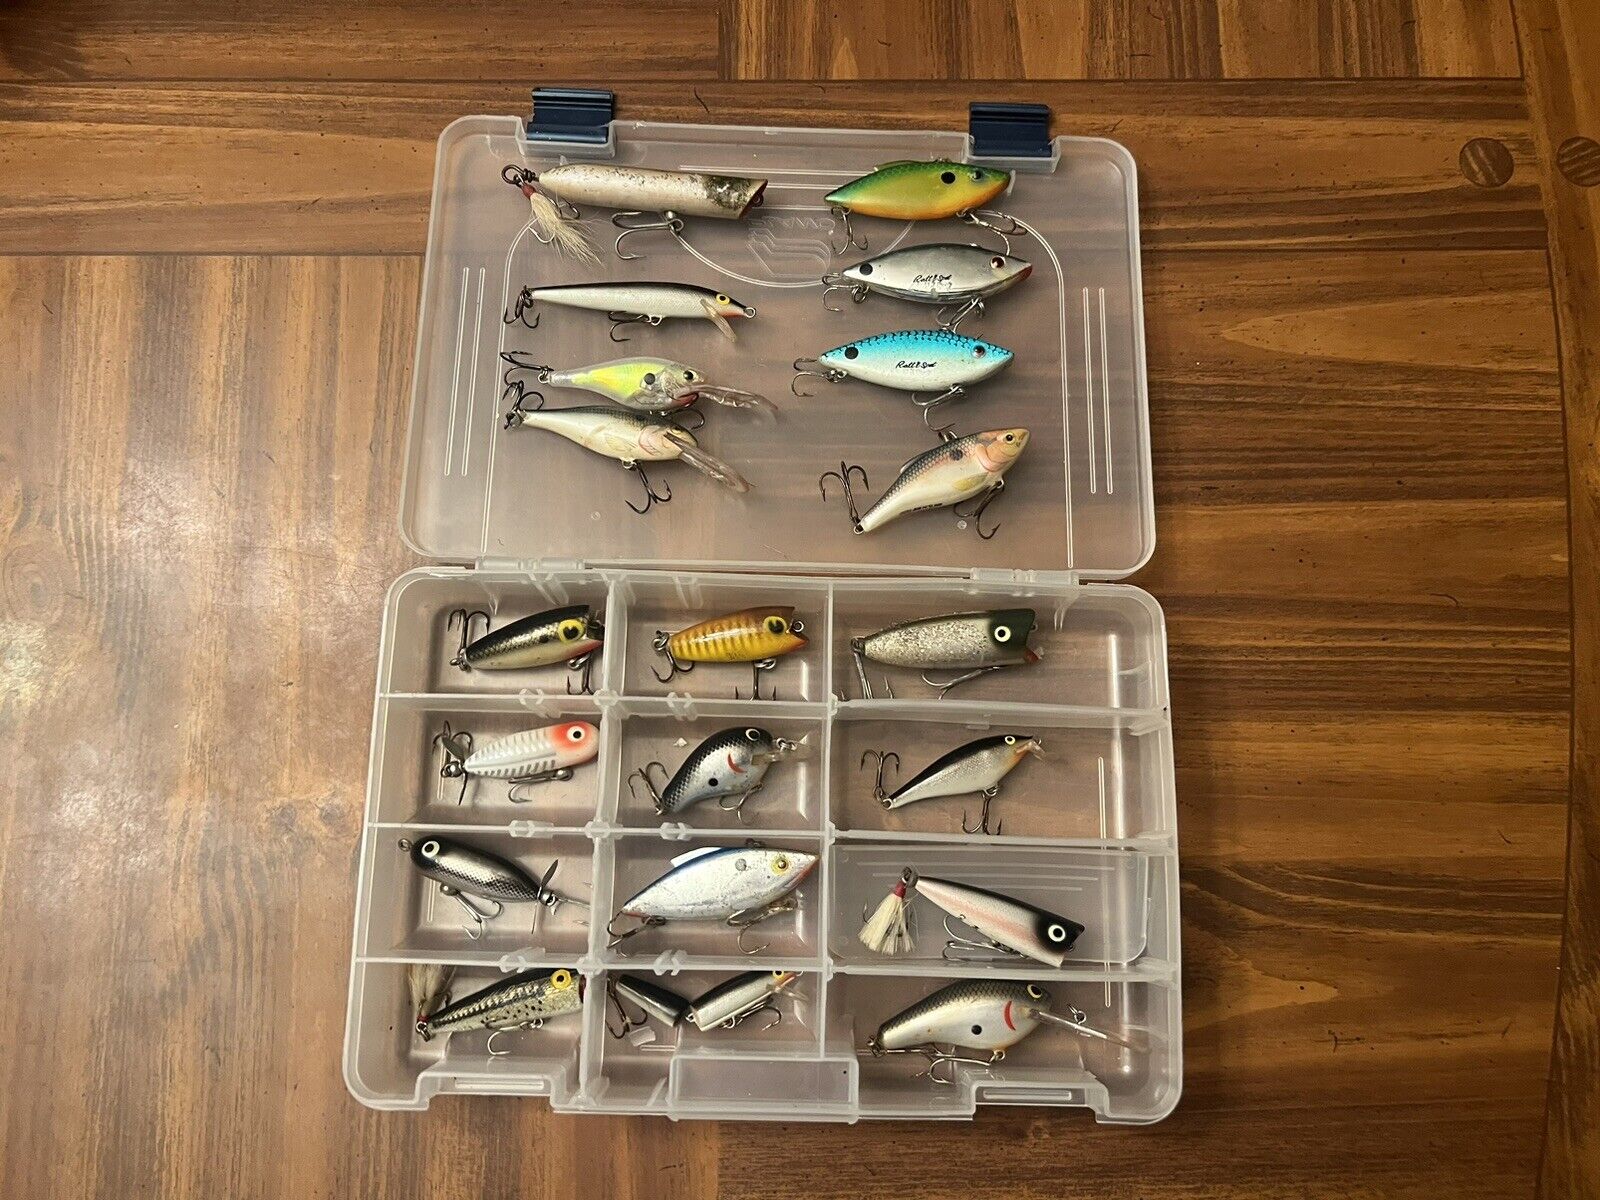 TACKLE LOT 20 BASS CRANKBAIT LURES TOPWATER RATTLE TRAP Freshwater Fishing